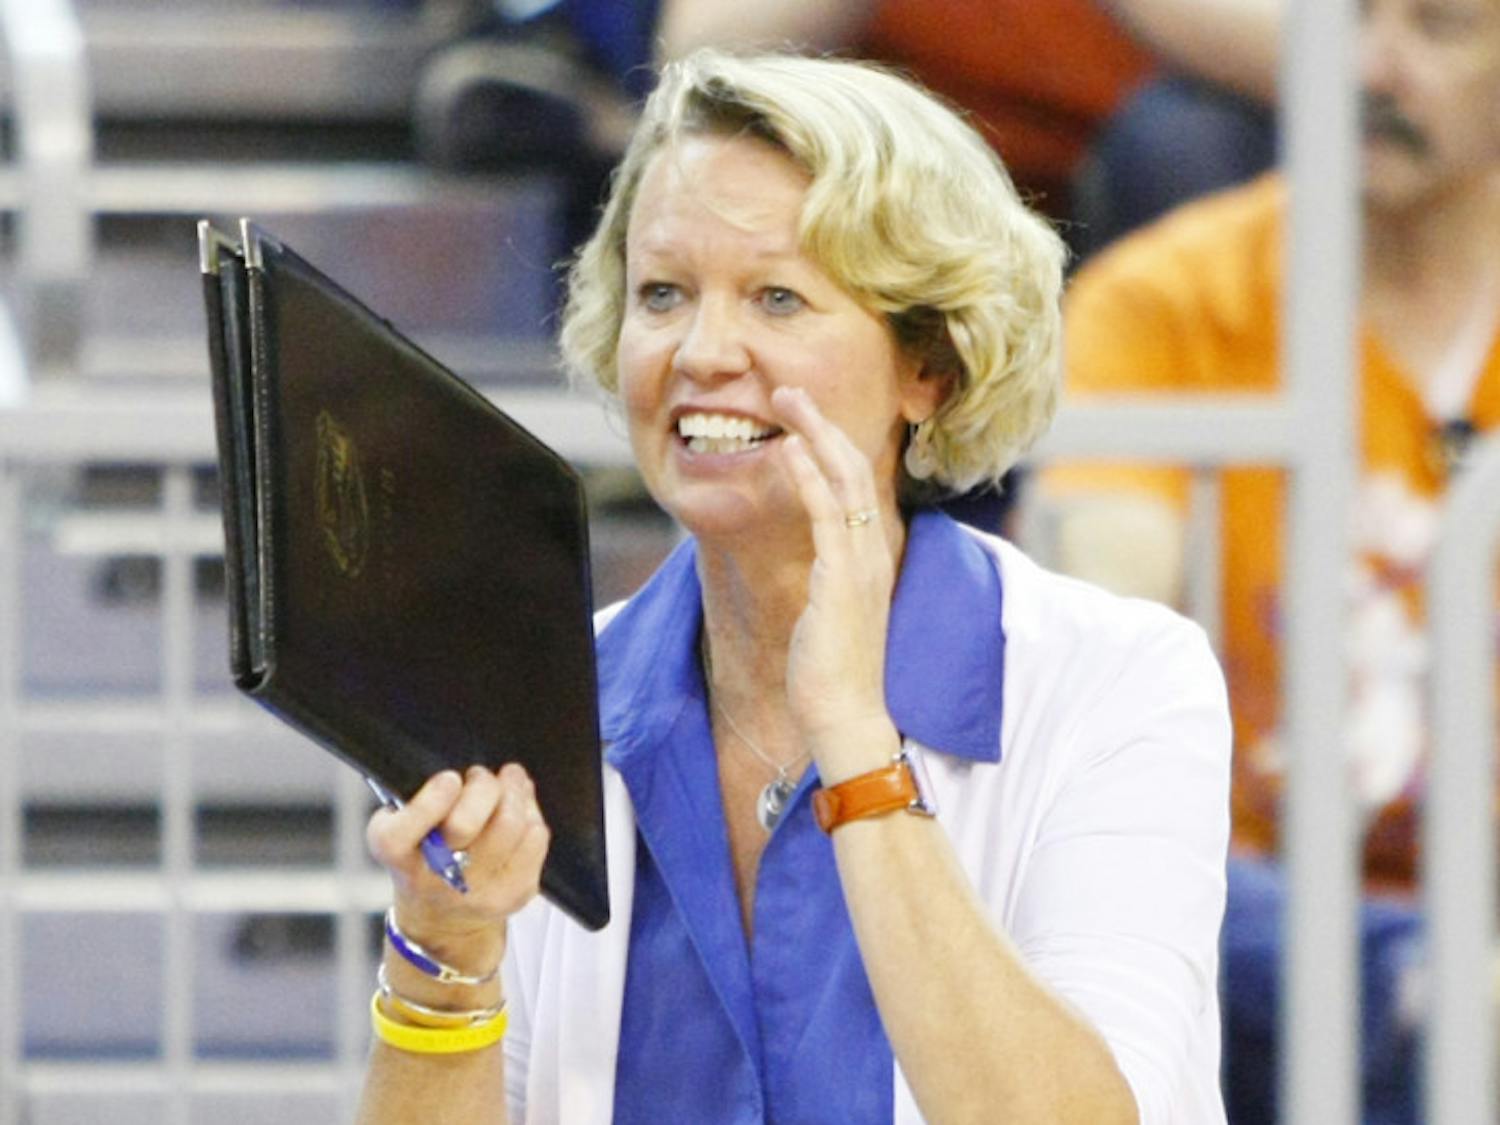 Florida coach Mary Wise claps during a 3-0 win against FIU on Aug. 24, 2012 in the O'Connell Center.